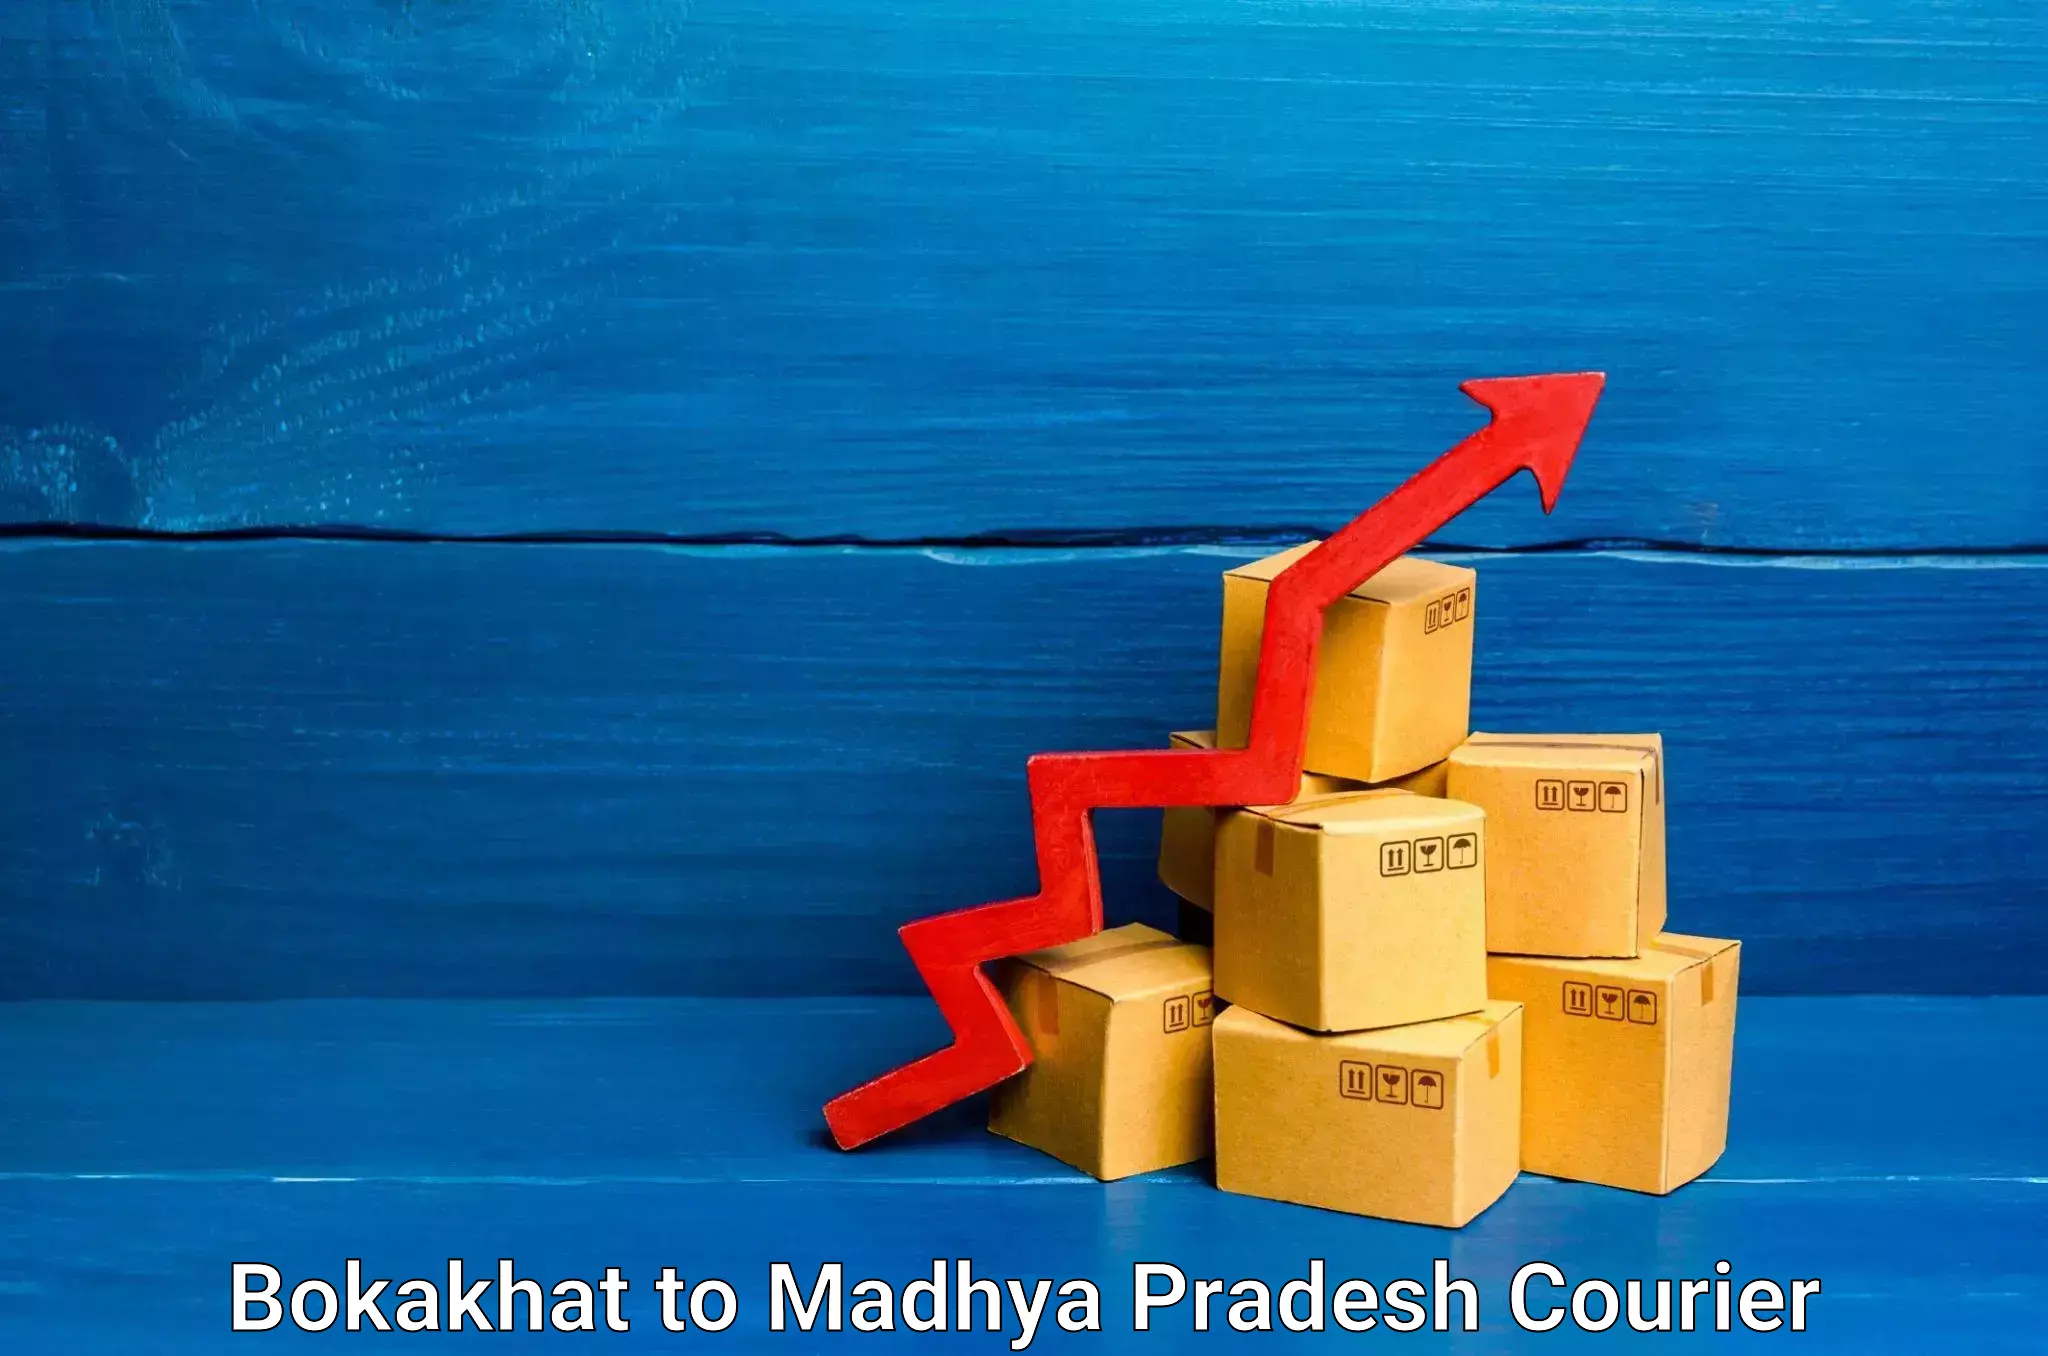 Express courier capabilities in Bokakhat to Khandwa